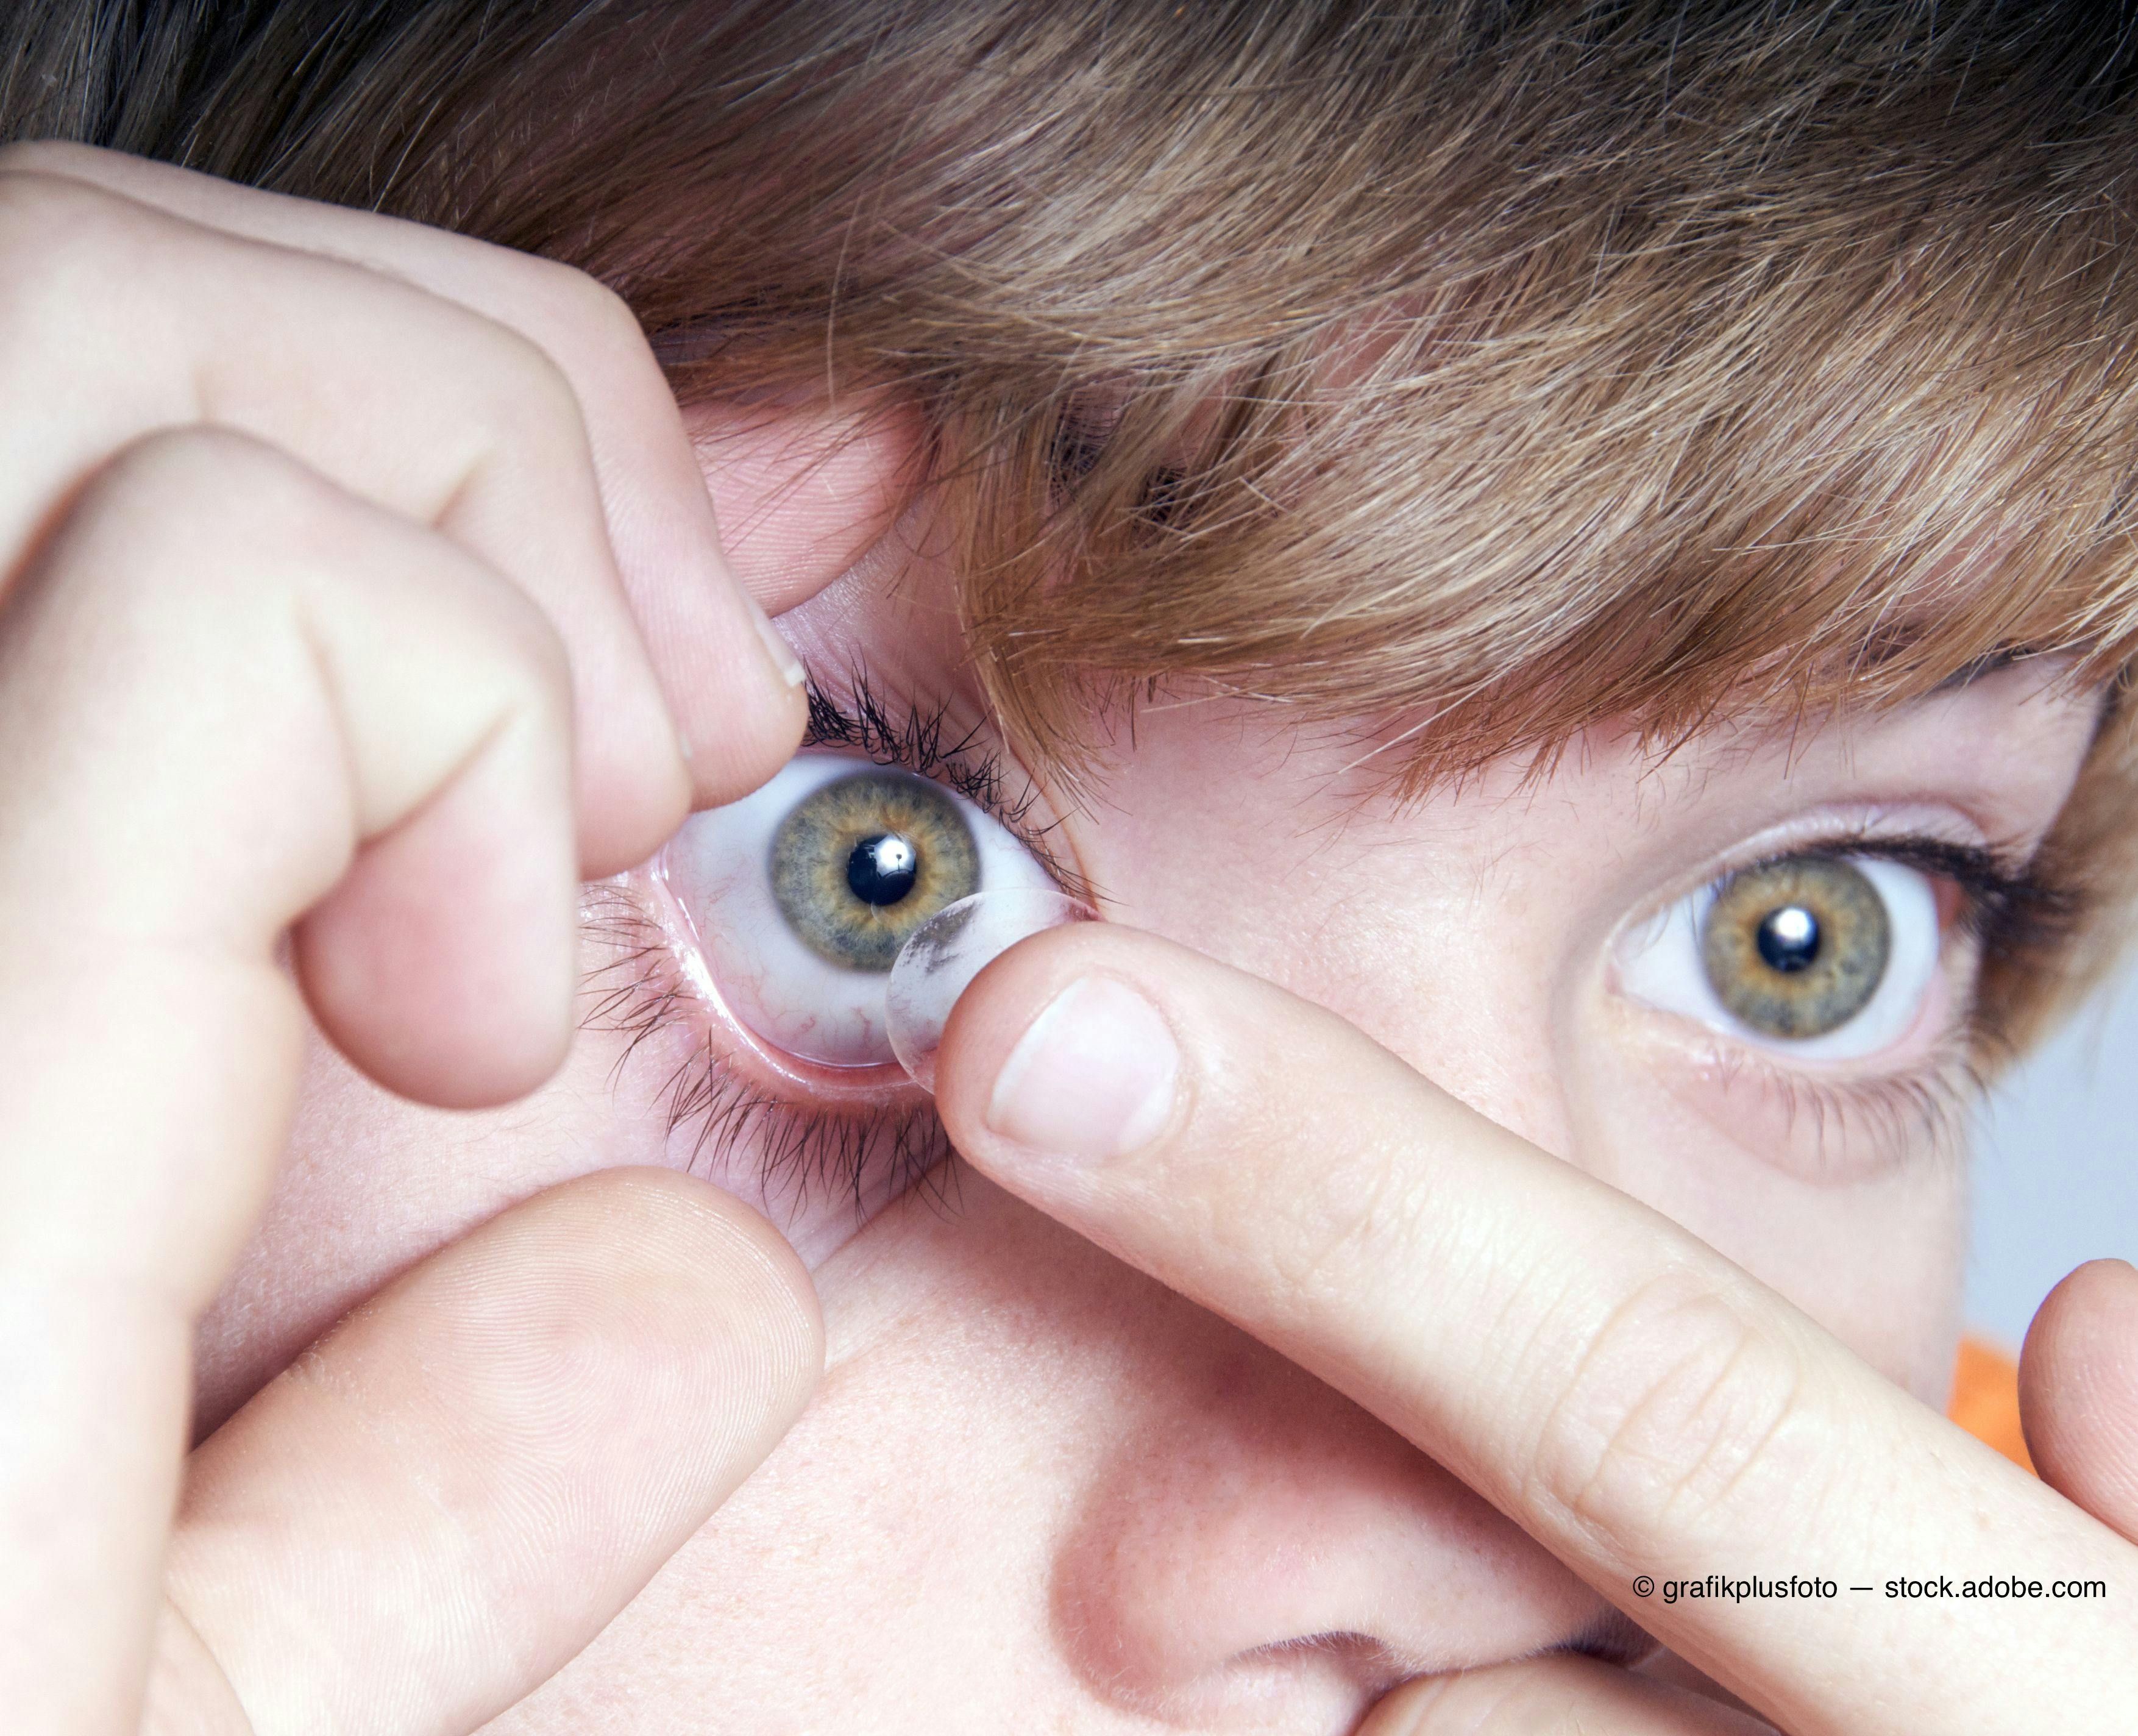 4 tips to help staff identify contact lens candidates